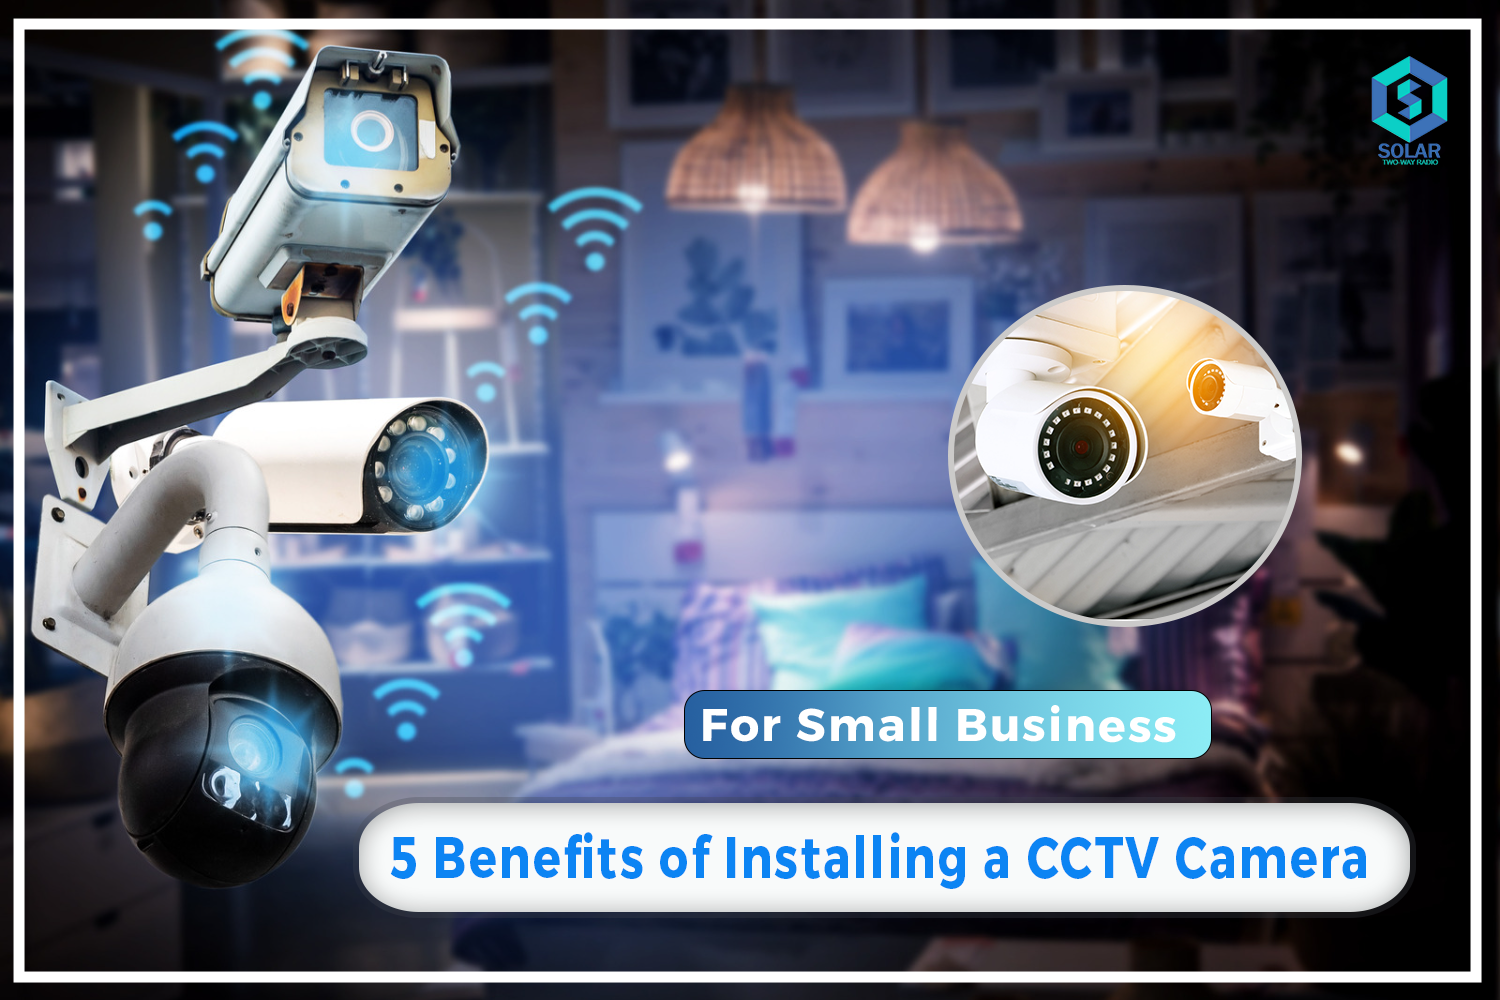 5 Benefits of Installing a CCTV Camera For Small Business